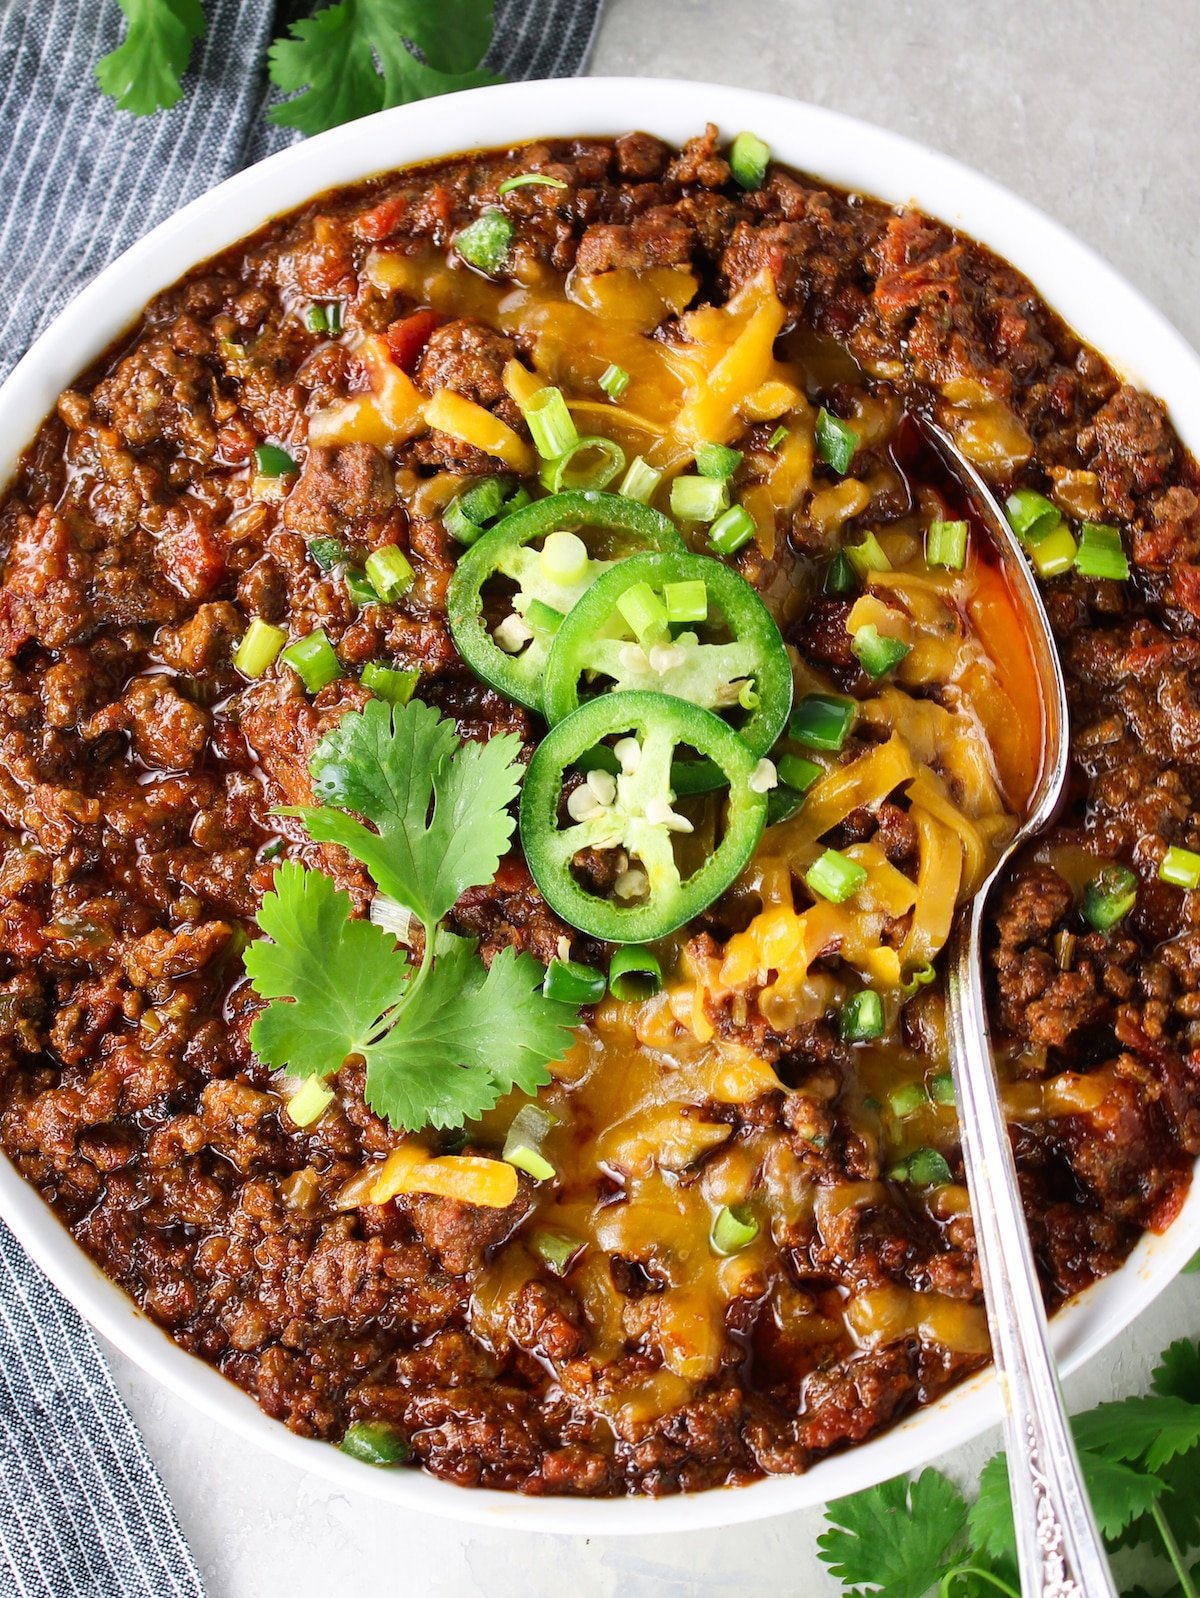 A bowl of chili with cheese, jalapeños and green onions.